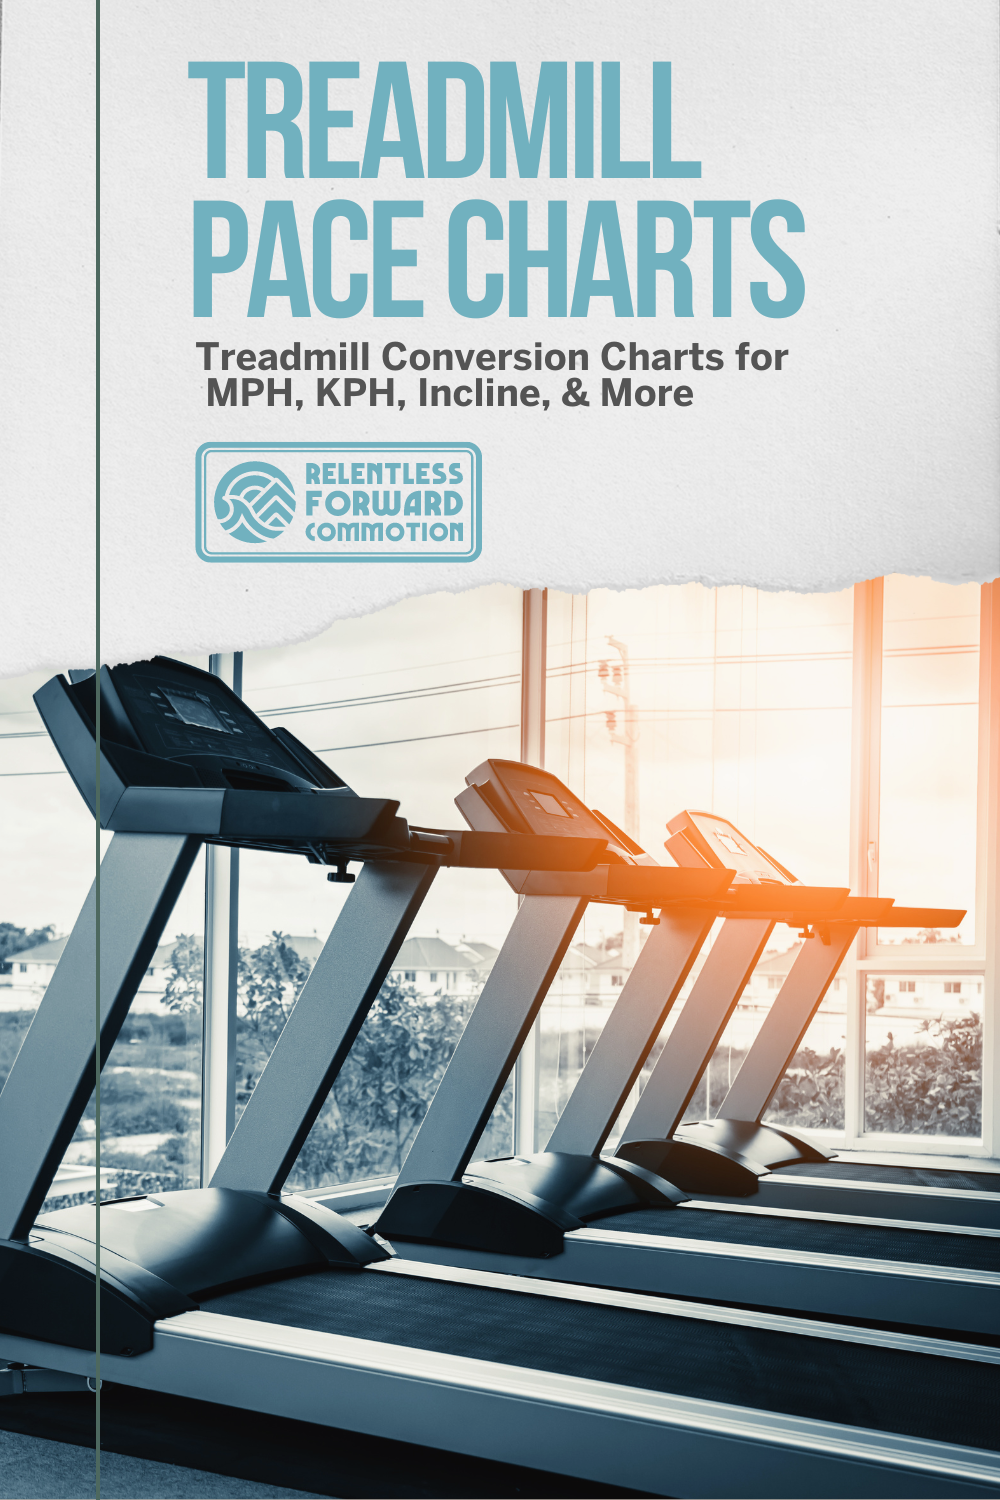 Running pace chart: How to convert min/km to min/miles